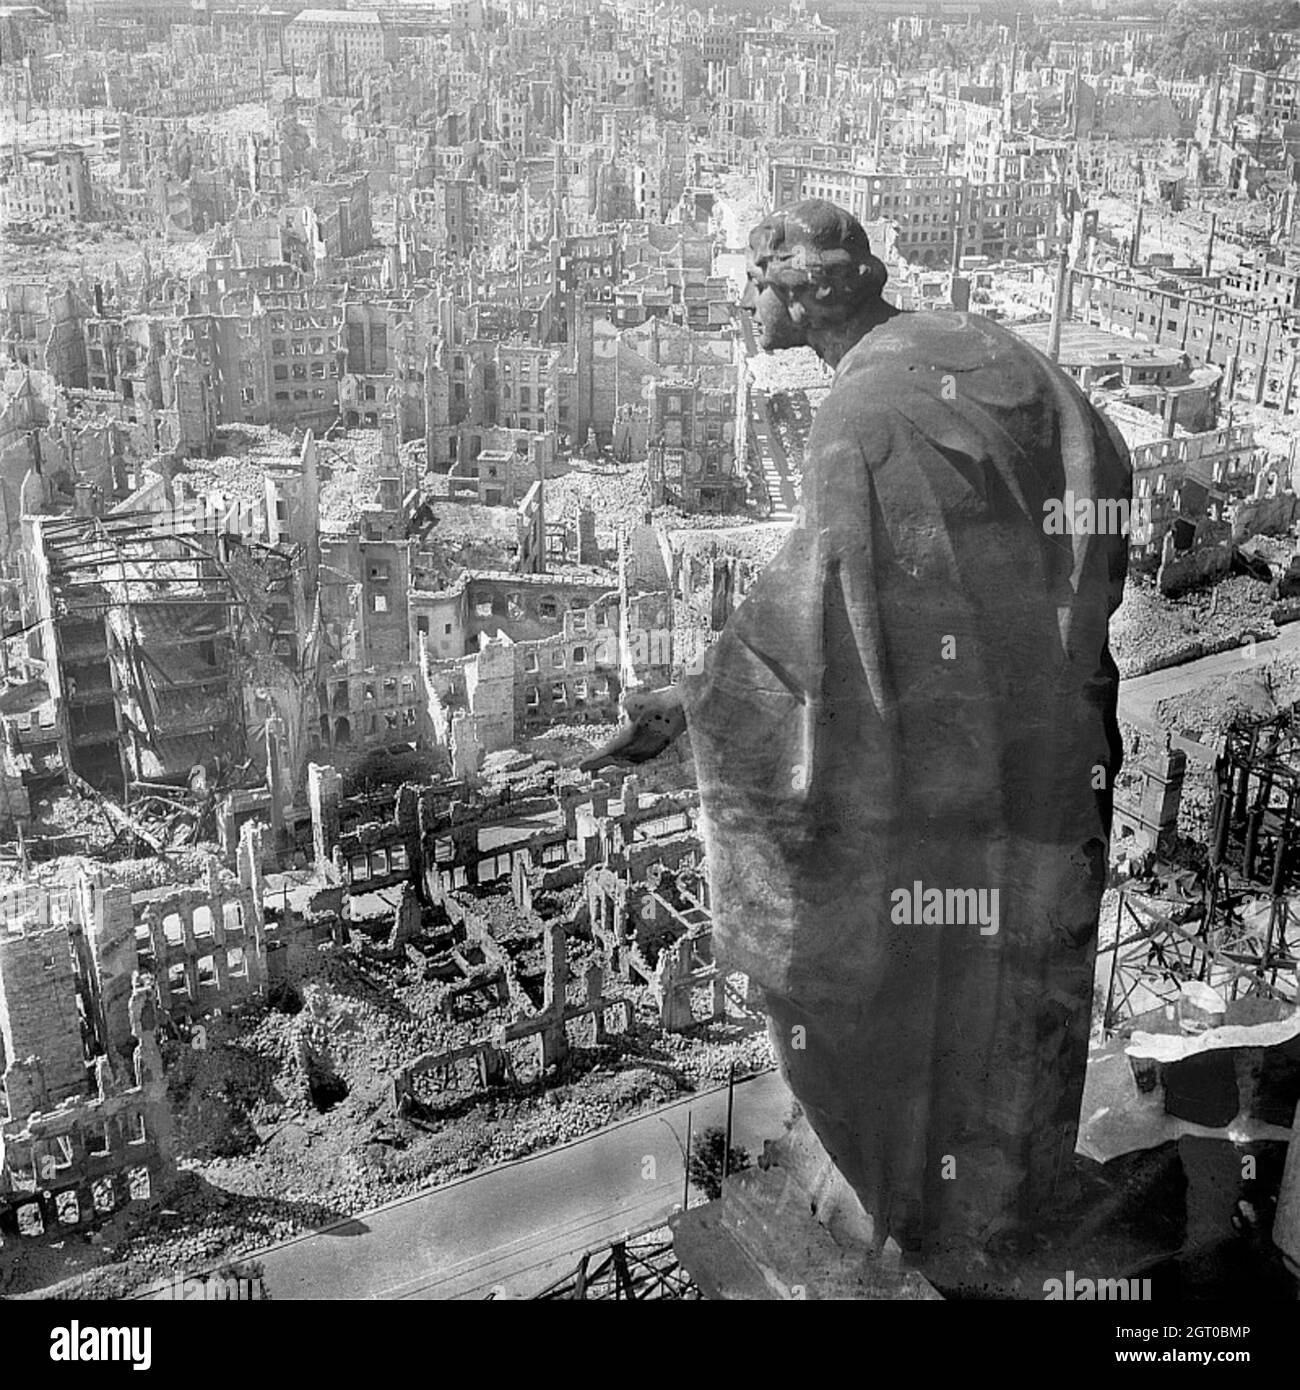 Dresden from the Rathaus (city hall) in 1945, showing the ruins of the city centre. Stock Photo